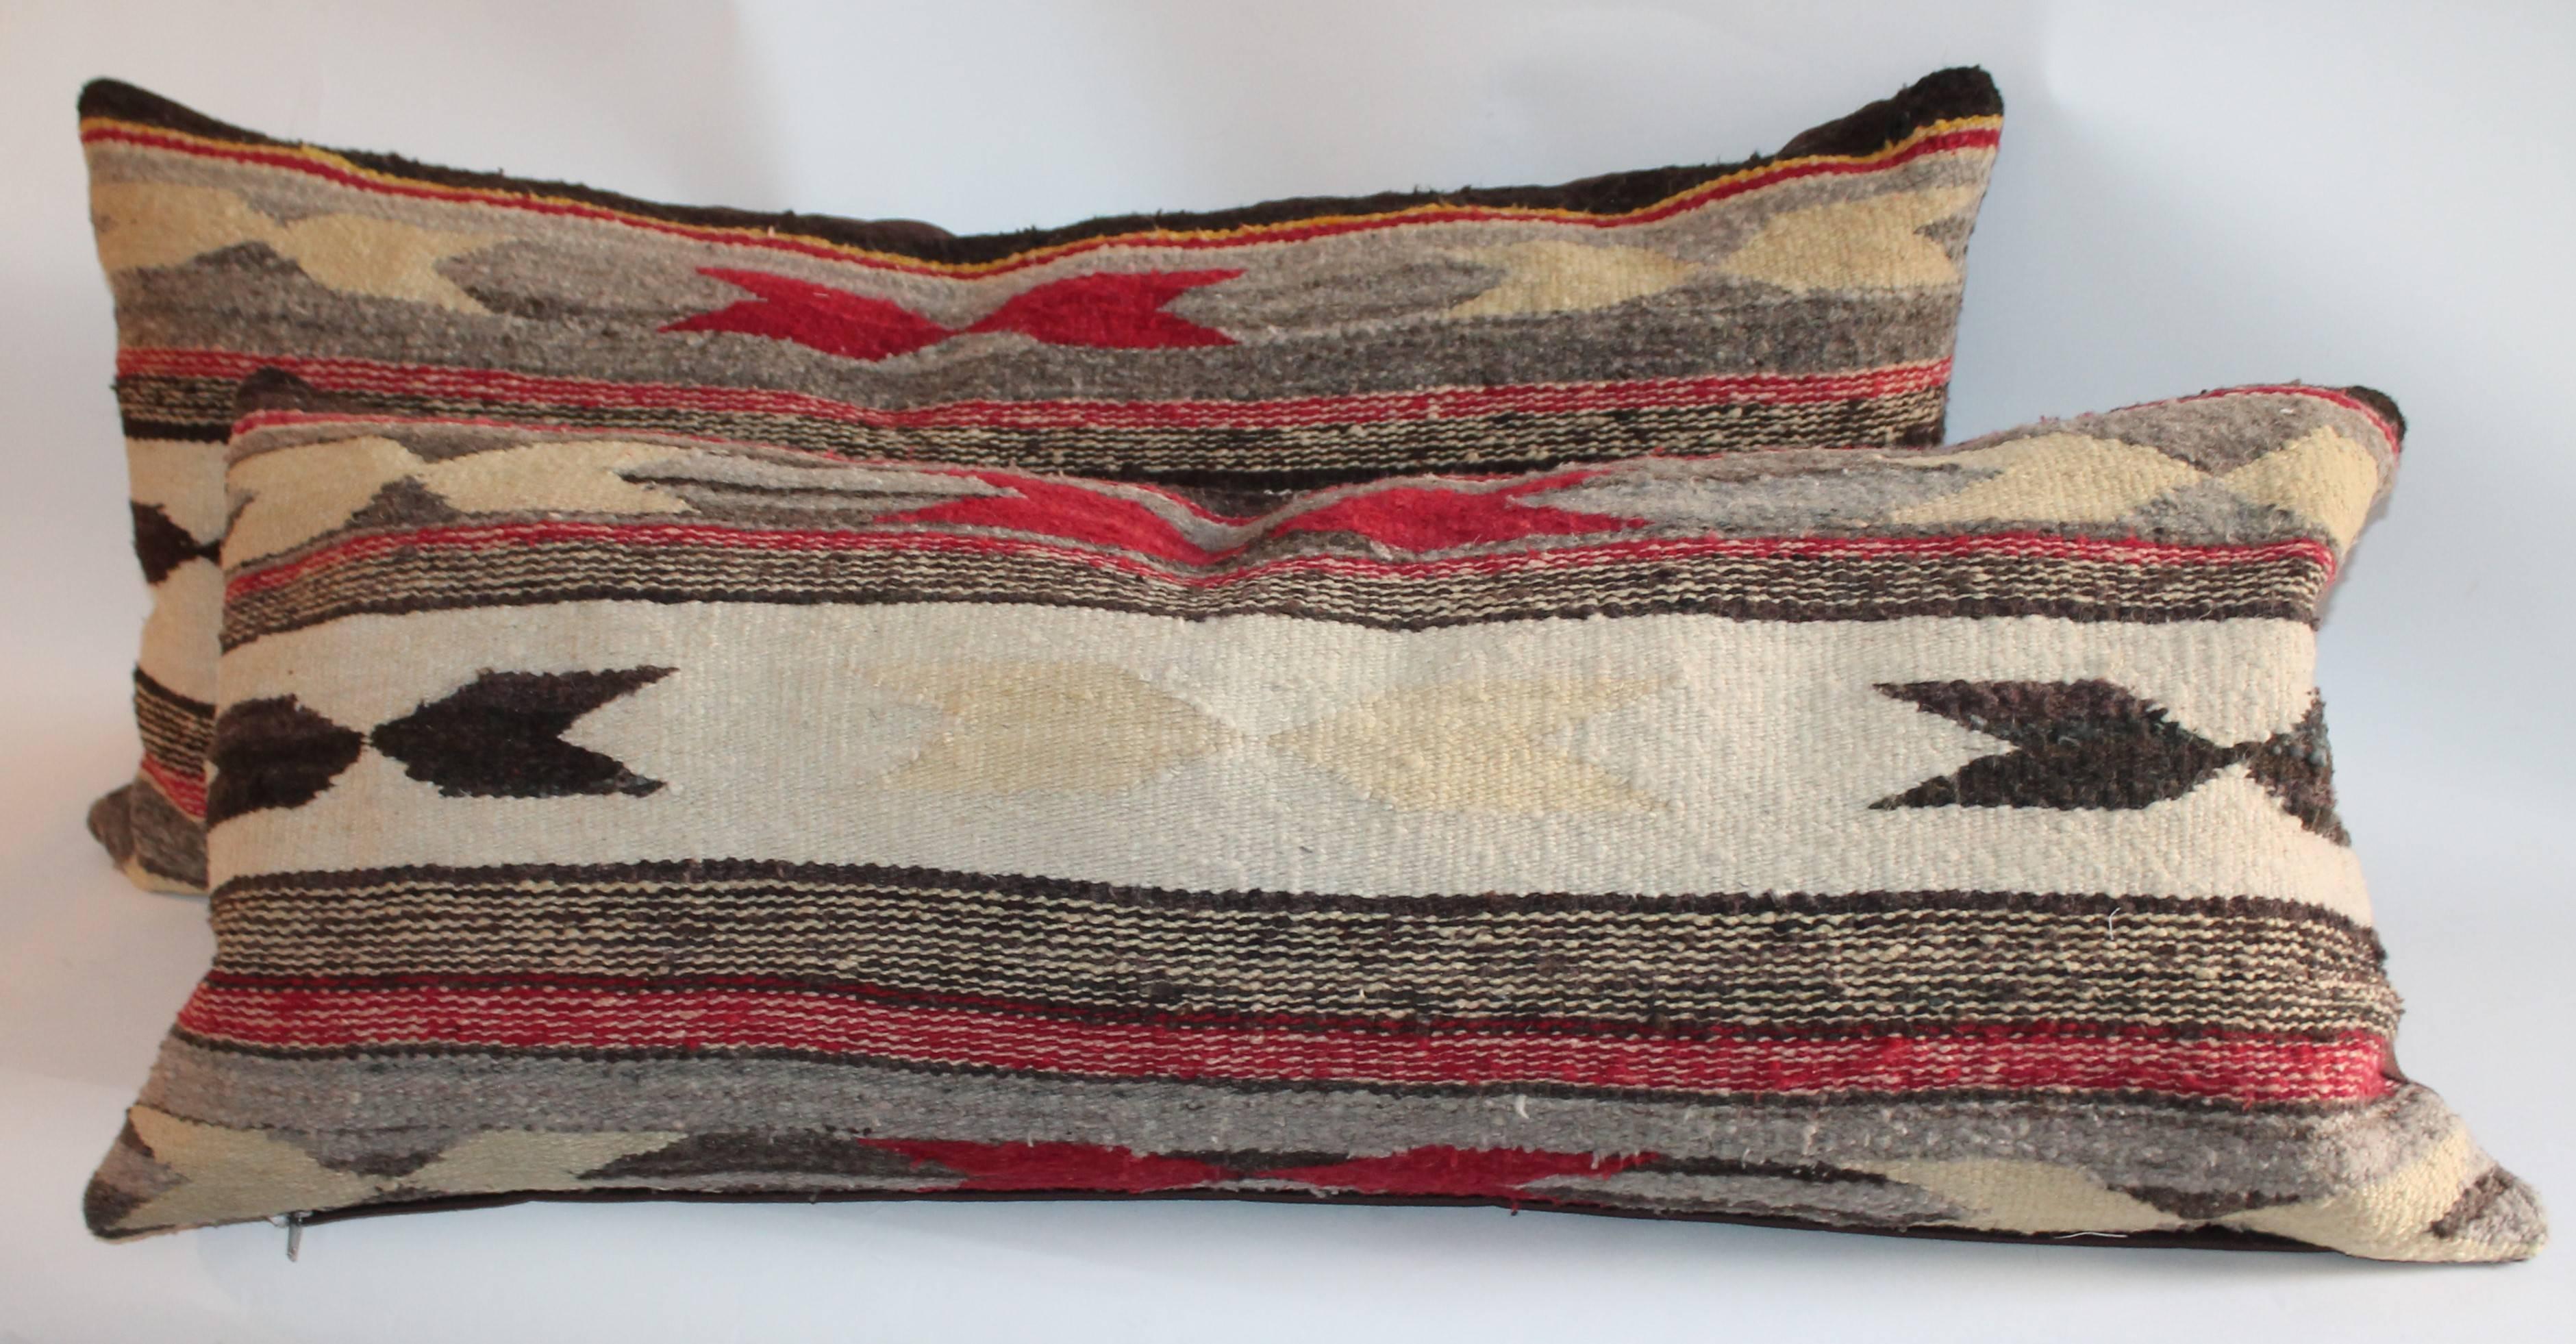 These Navajo Indian weaving bolster pillows have three color and chevron pattern. The backing is in a brown cotton linen.
Large pillows is 16 x 38 / small pillow 15 x 37 / each bolster is $950.00 / 1695.00.